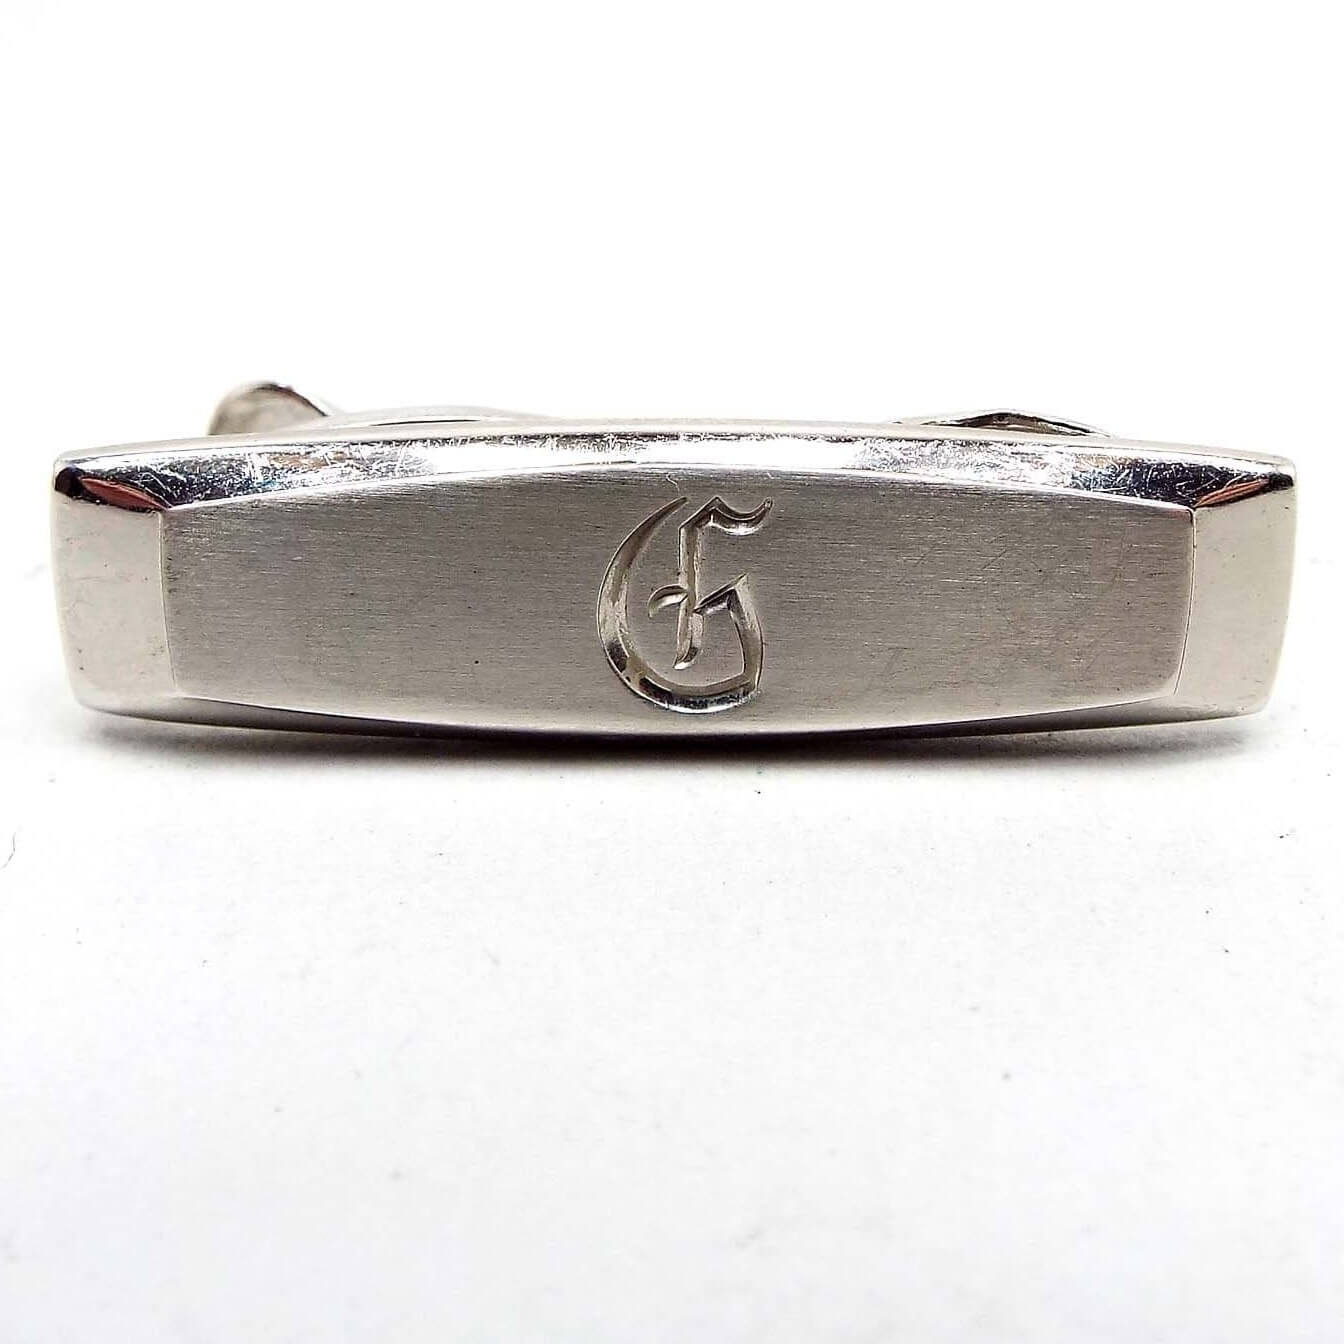 Front view of the Mid Century vintage Hickok initial tie clip. It is silver tone in color with the letter G engraved on the front.